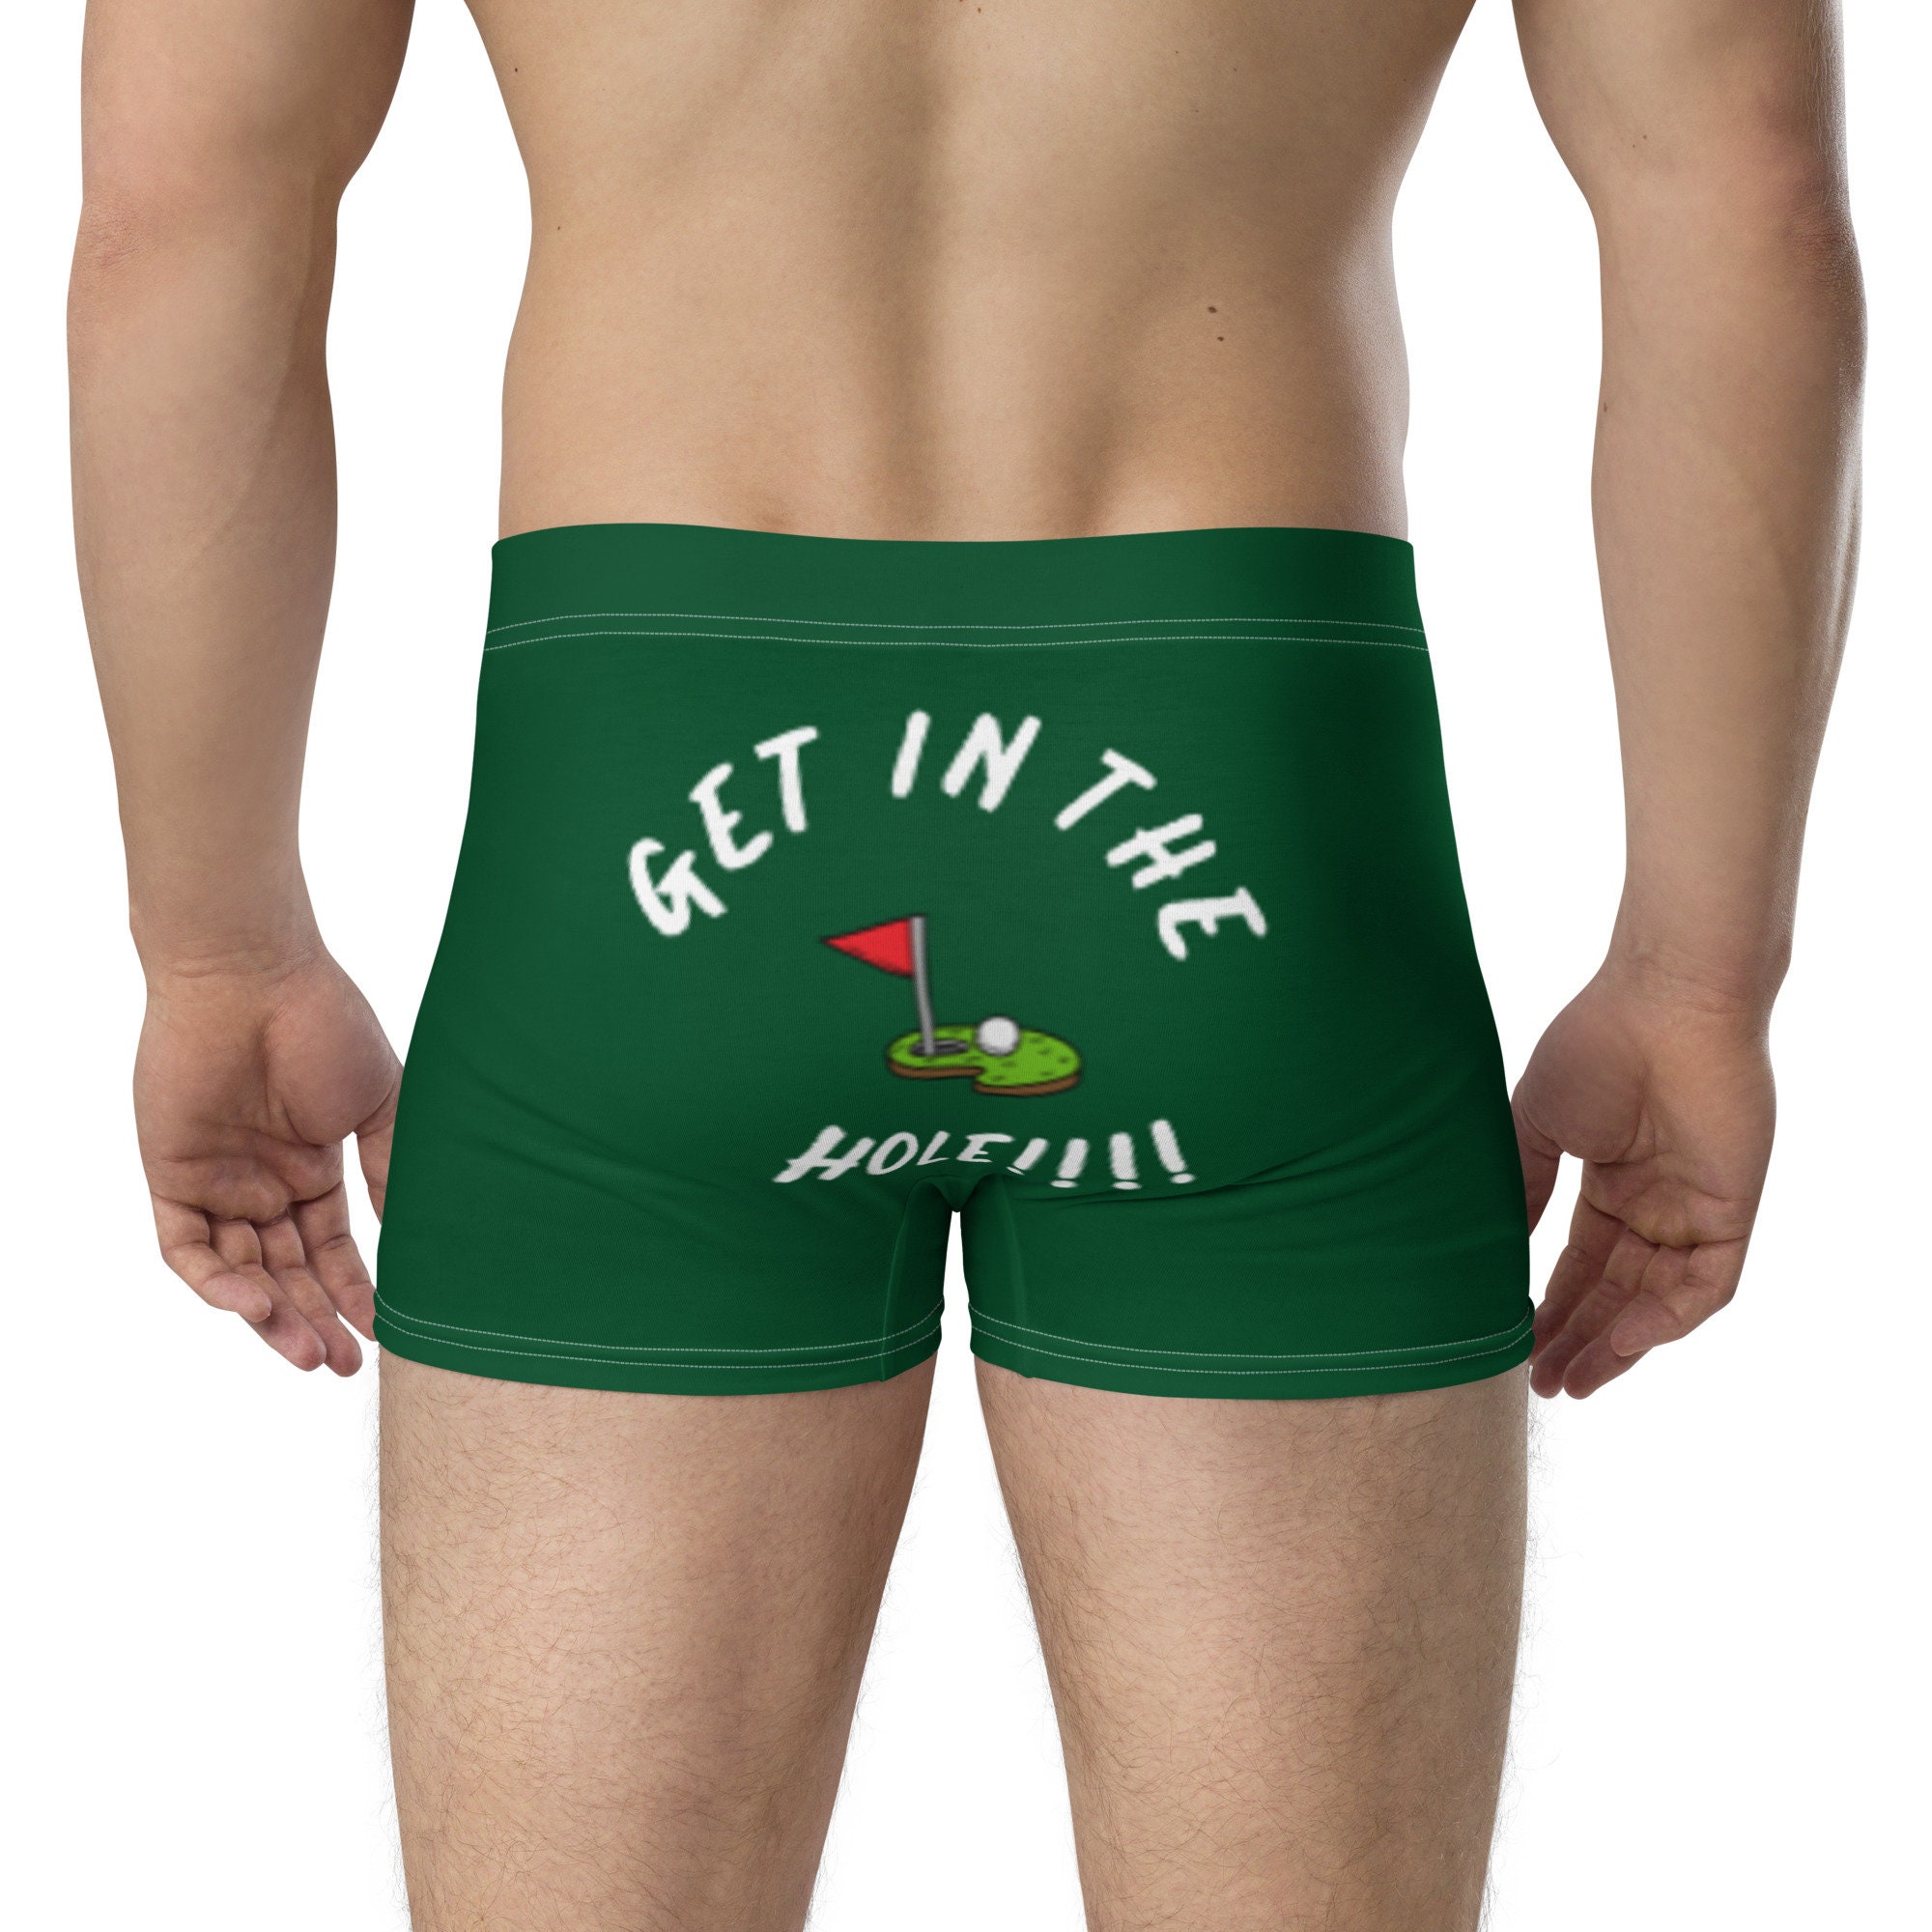 For Recreational Use Only Boxer Briefs, Free Shipping, Funny